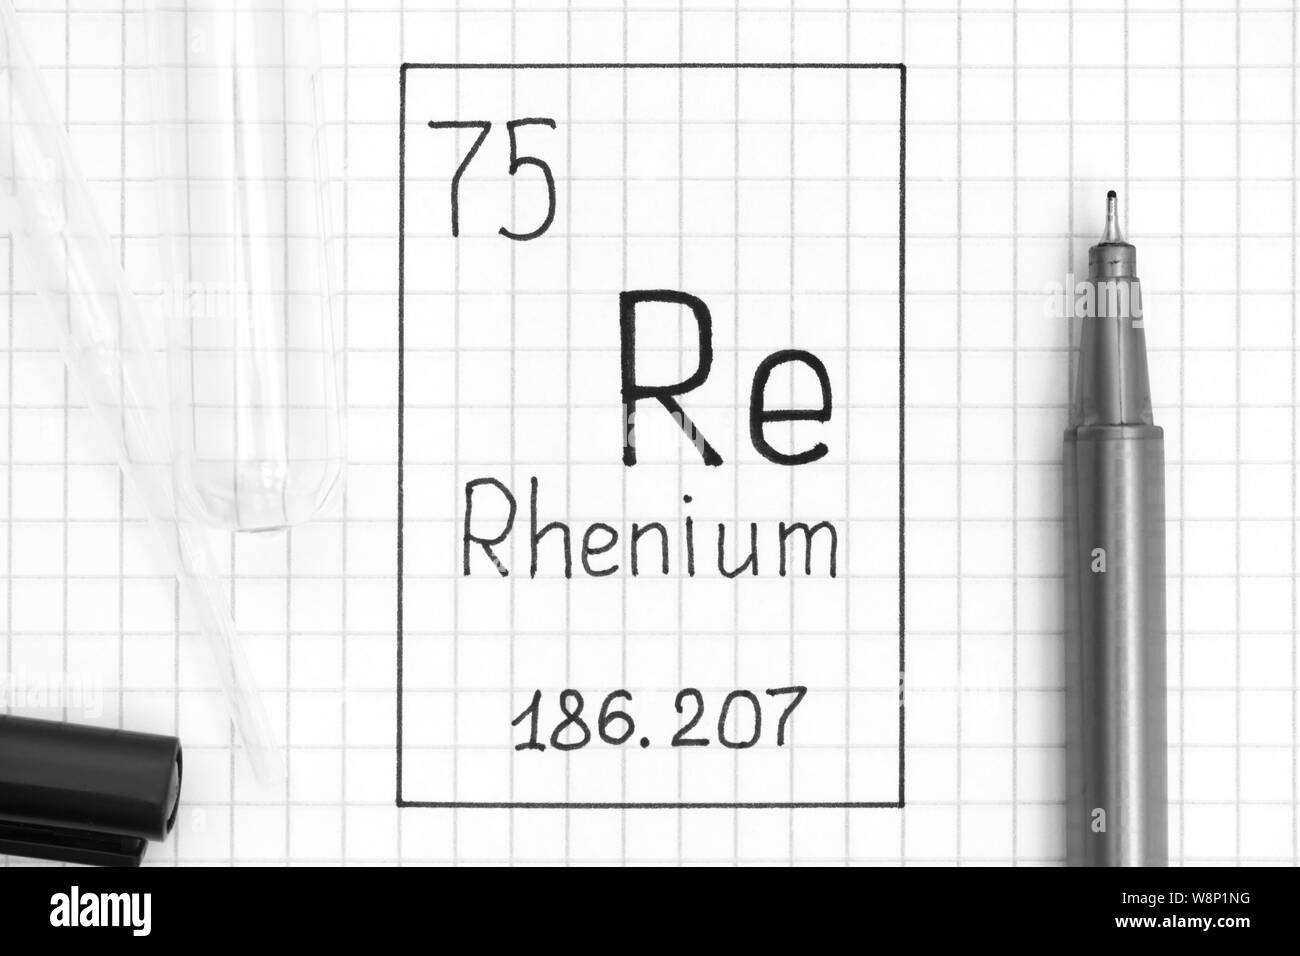 The Periodic table of elements. Handwriting chemical element Rhenium Re with black pen, test tube and pipette. Close-up. Stock Photo